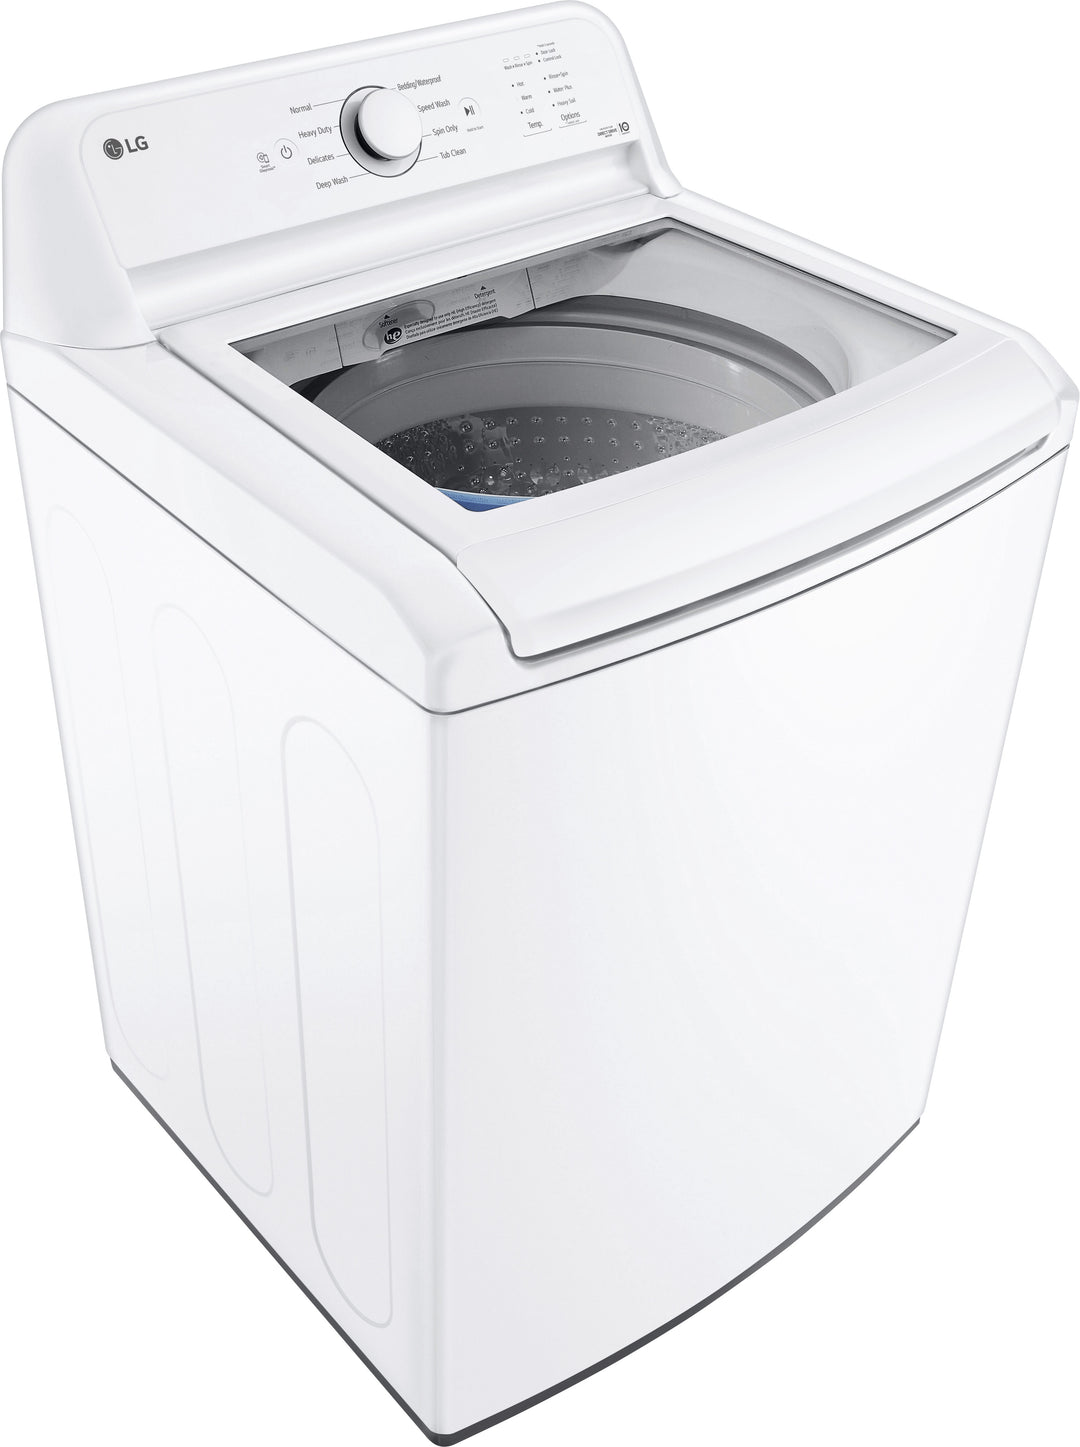 LG - 4.3 Cu. Ft. High-Efficiency Top Load Washer with SlamProof Glass Lid - White_12